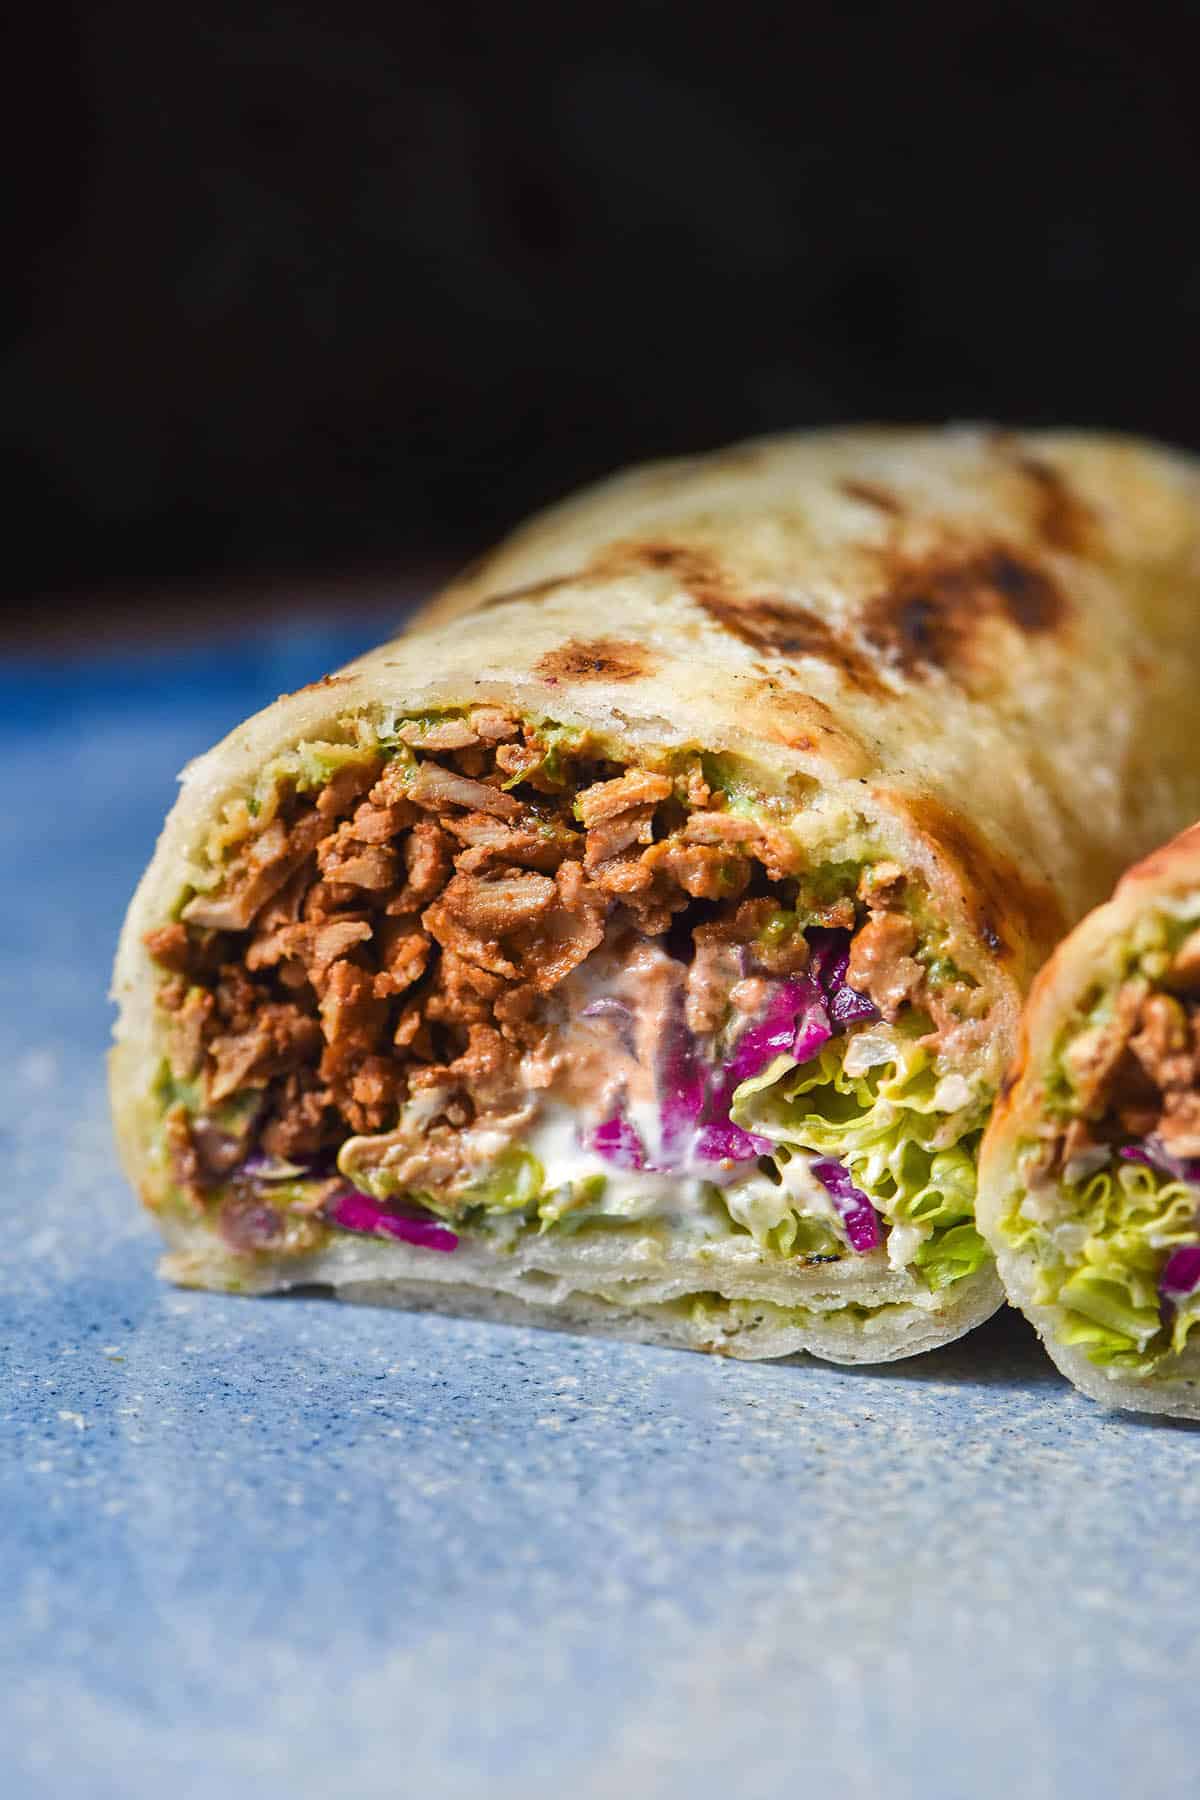 A side on image of half a gluten free burrito stuffed with tofu mince, pickled cabbage, lettuce, an avocado cilantro dressing and sour cream. The burrito sits on a bright blue ceramic plate against a dark backdrop